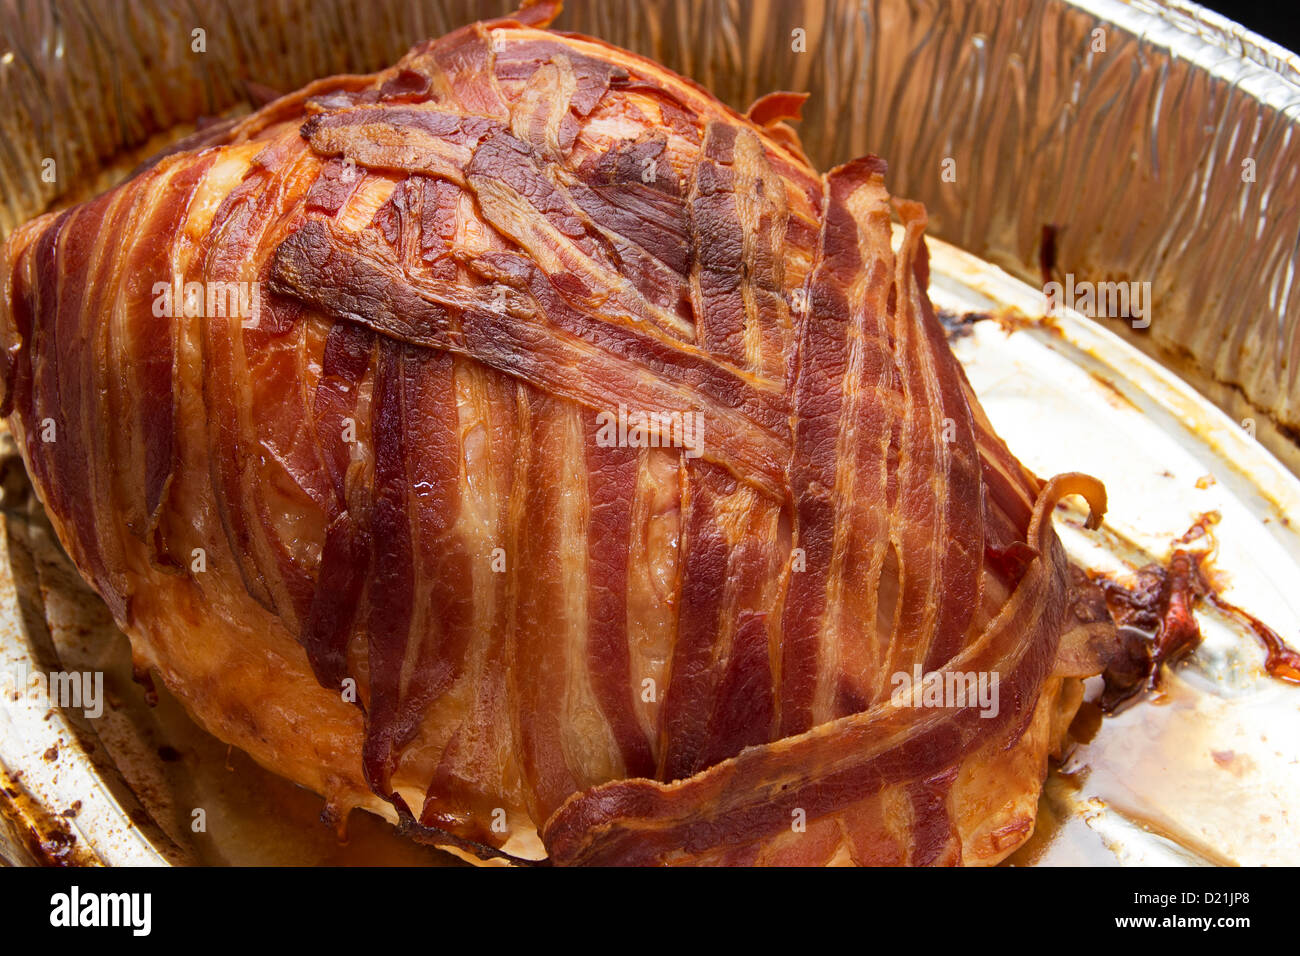 A cooked turkey crown covered in bacon Stock Photo